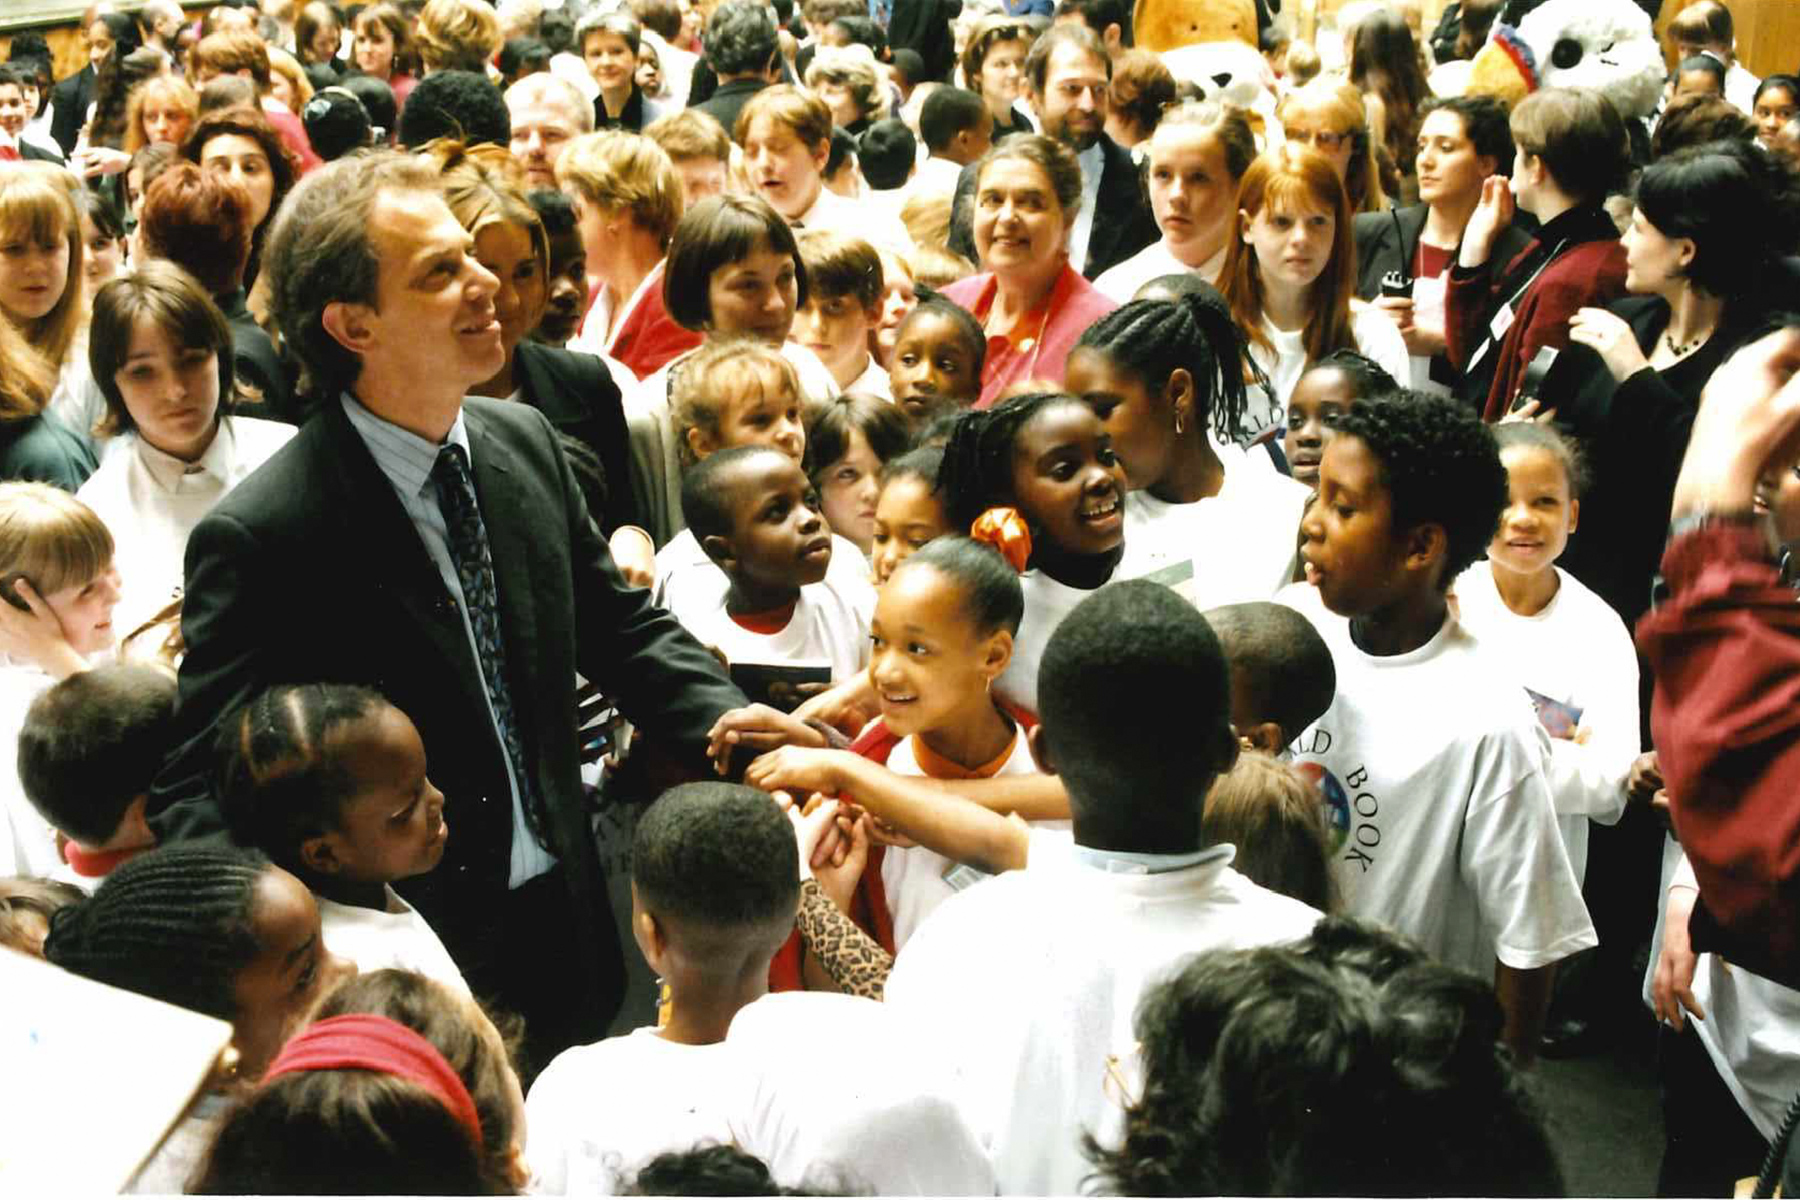 A photograph from 1997 of Tony Blair at the Globe Theatre surrounded by children